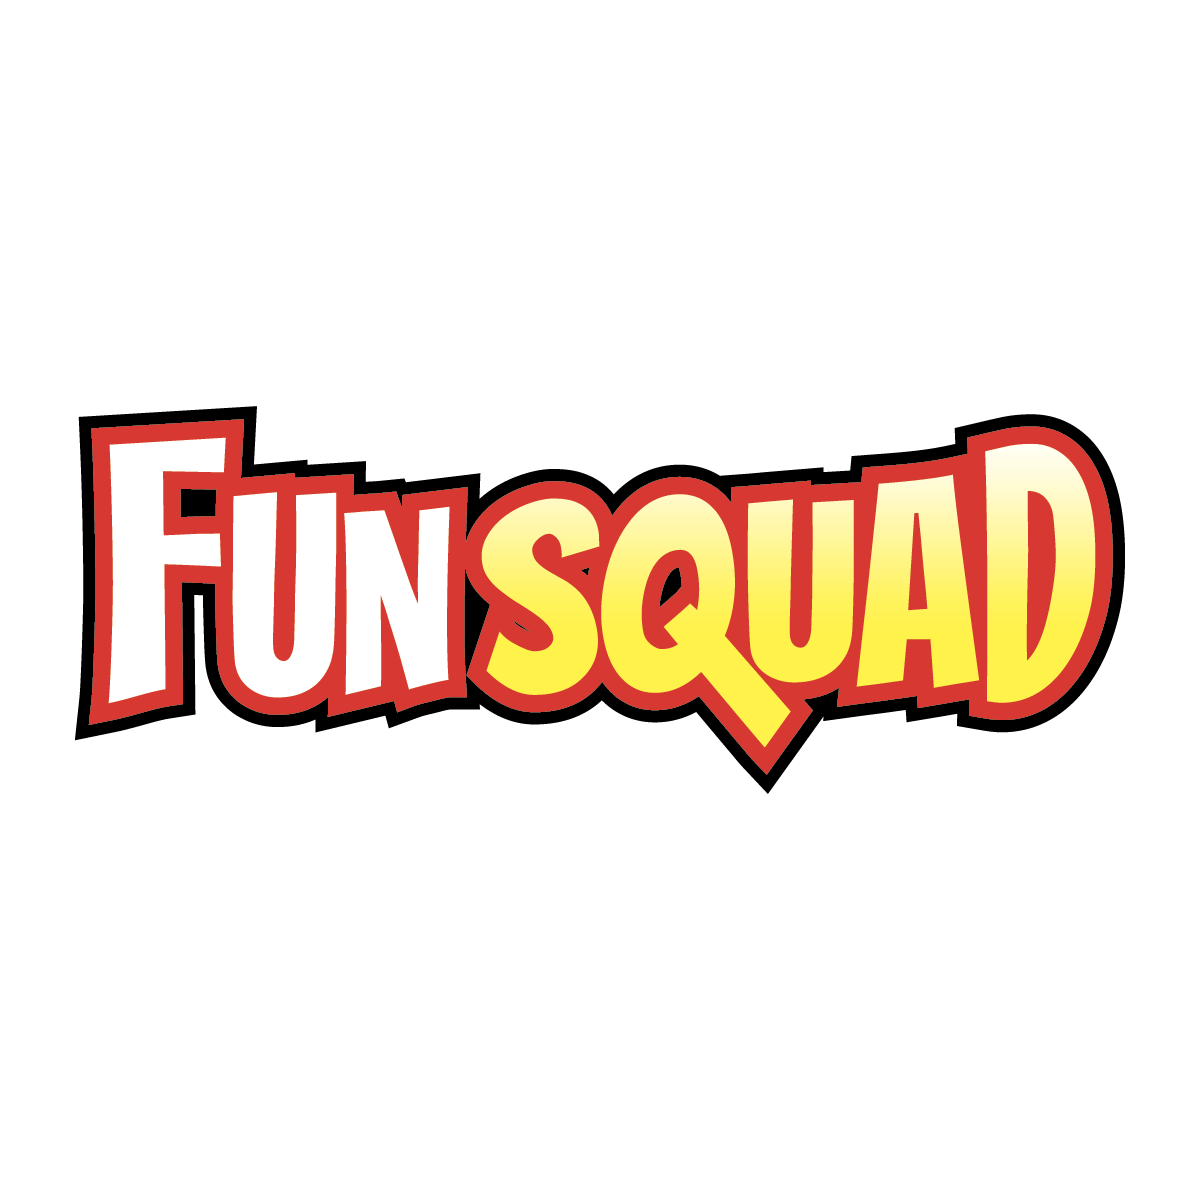 Hoodie Pullover - Fun Squad Red